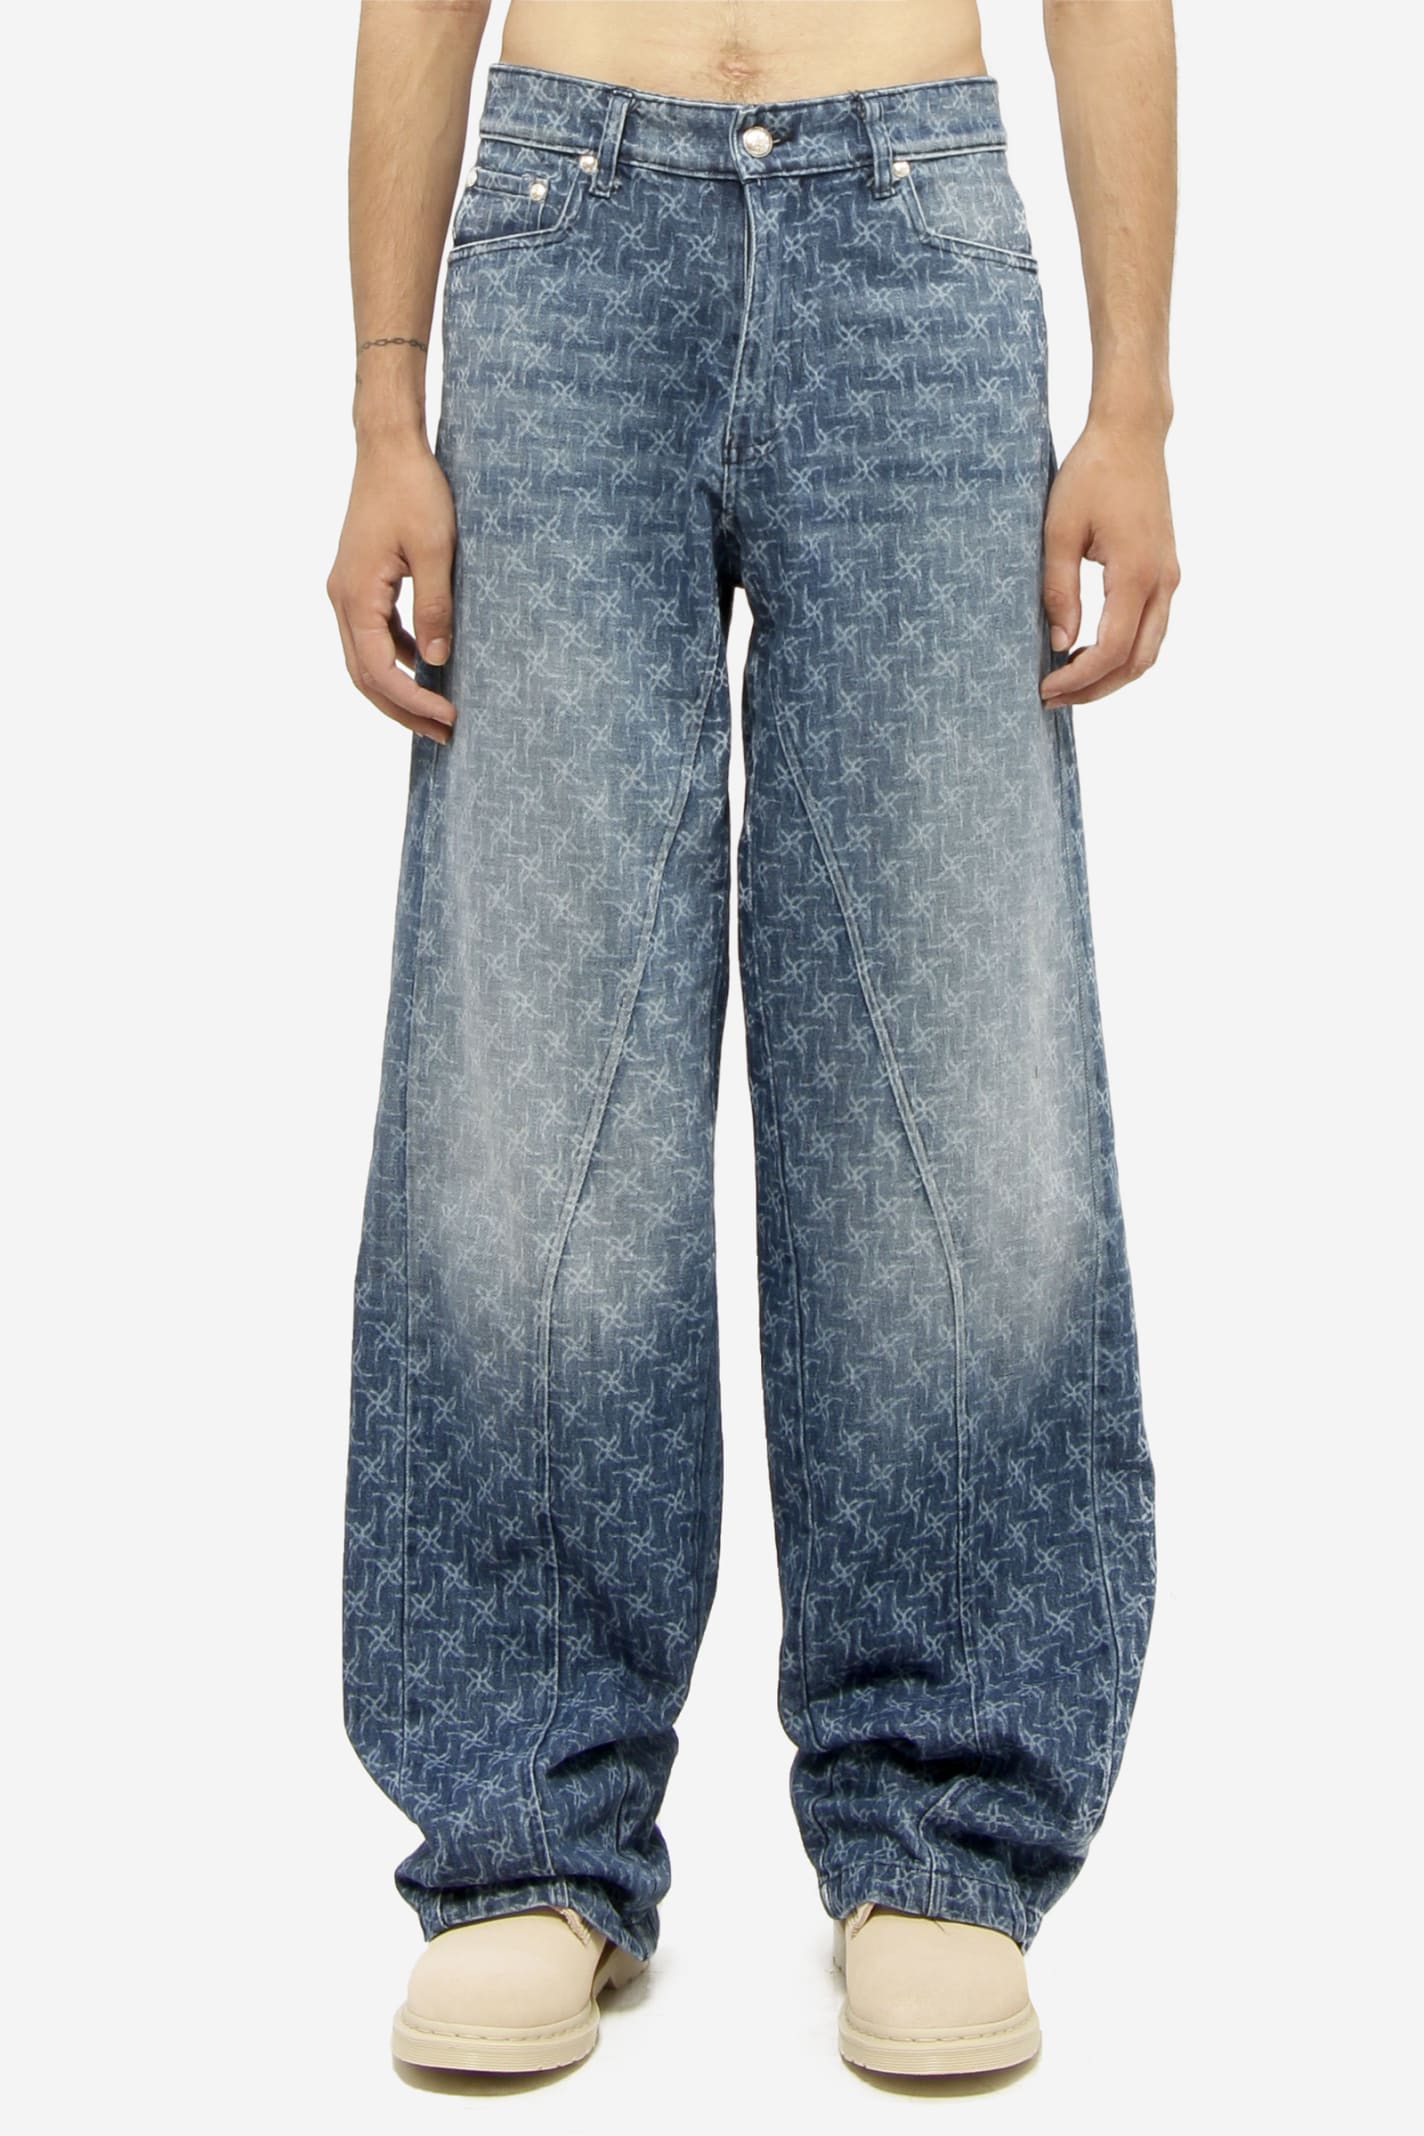 Formy Studio Notorious Baggy Pants